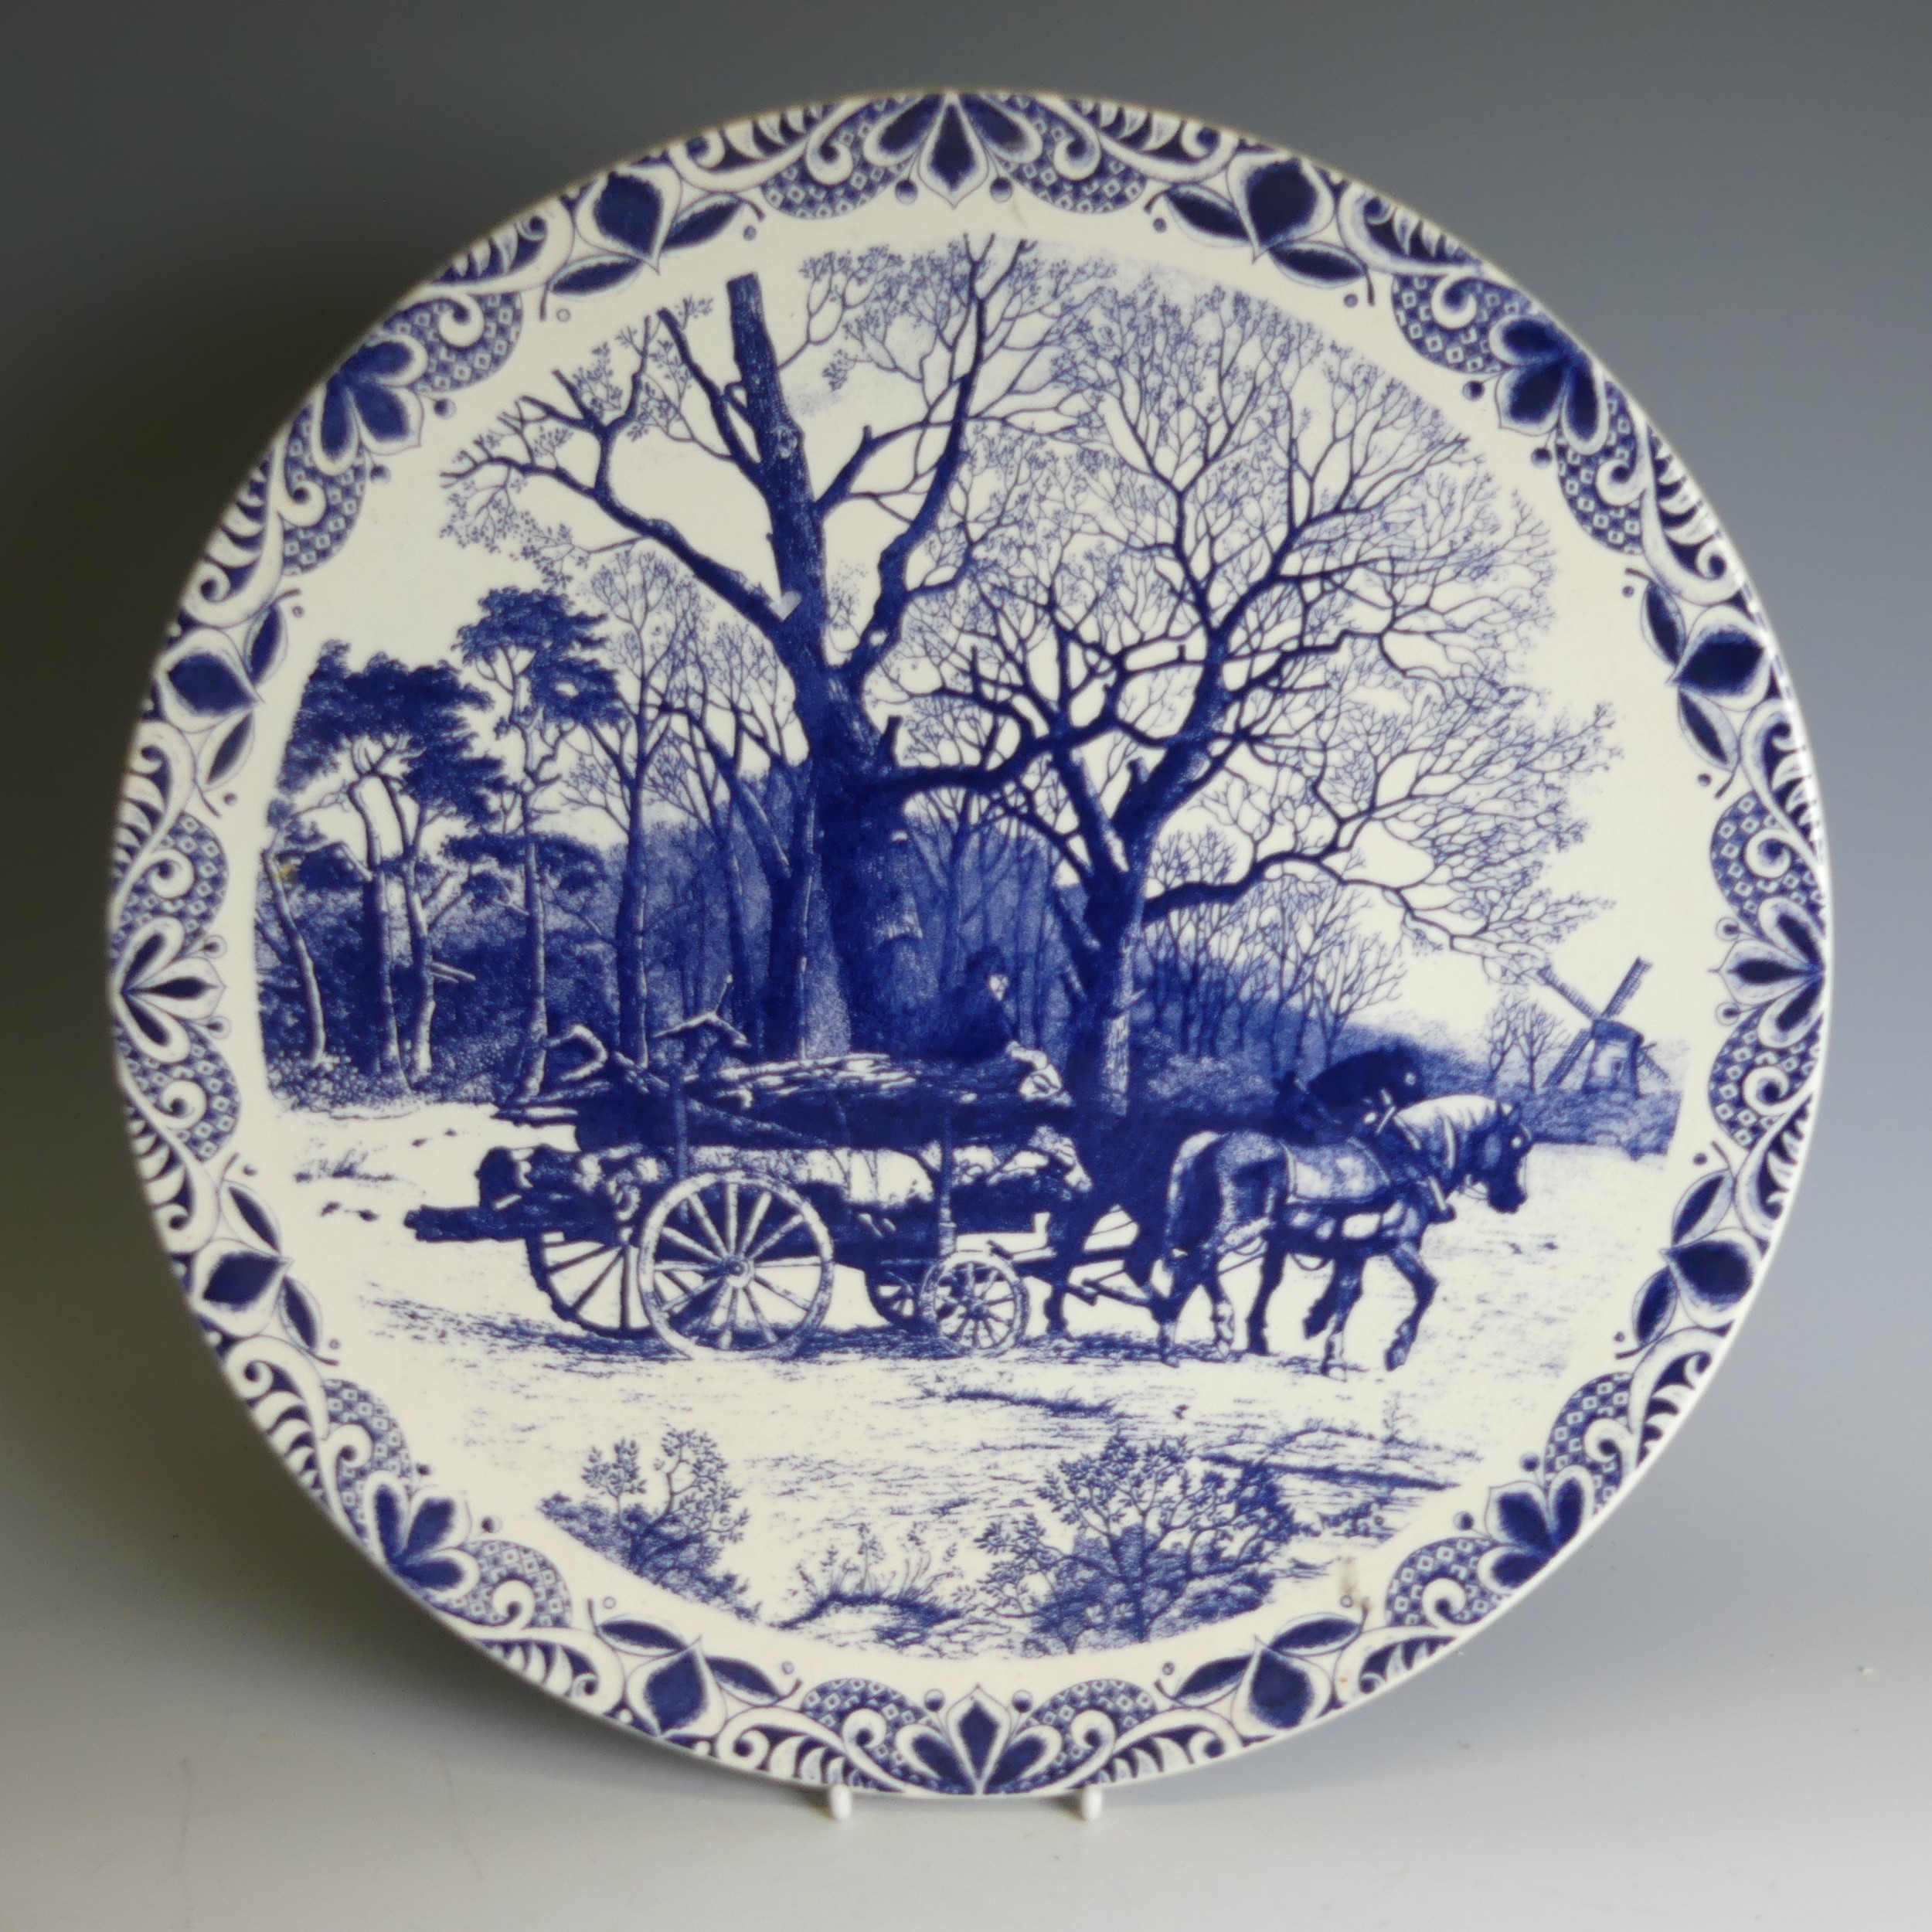 A pair of De Porceleyne Fles Delft pottery Plates, of moulded form, decorated with birds amongst - Image 9 of 10